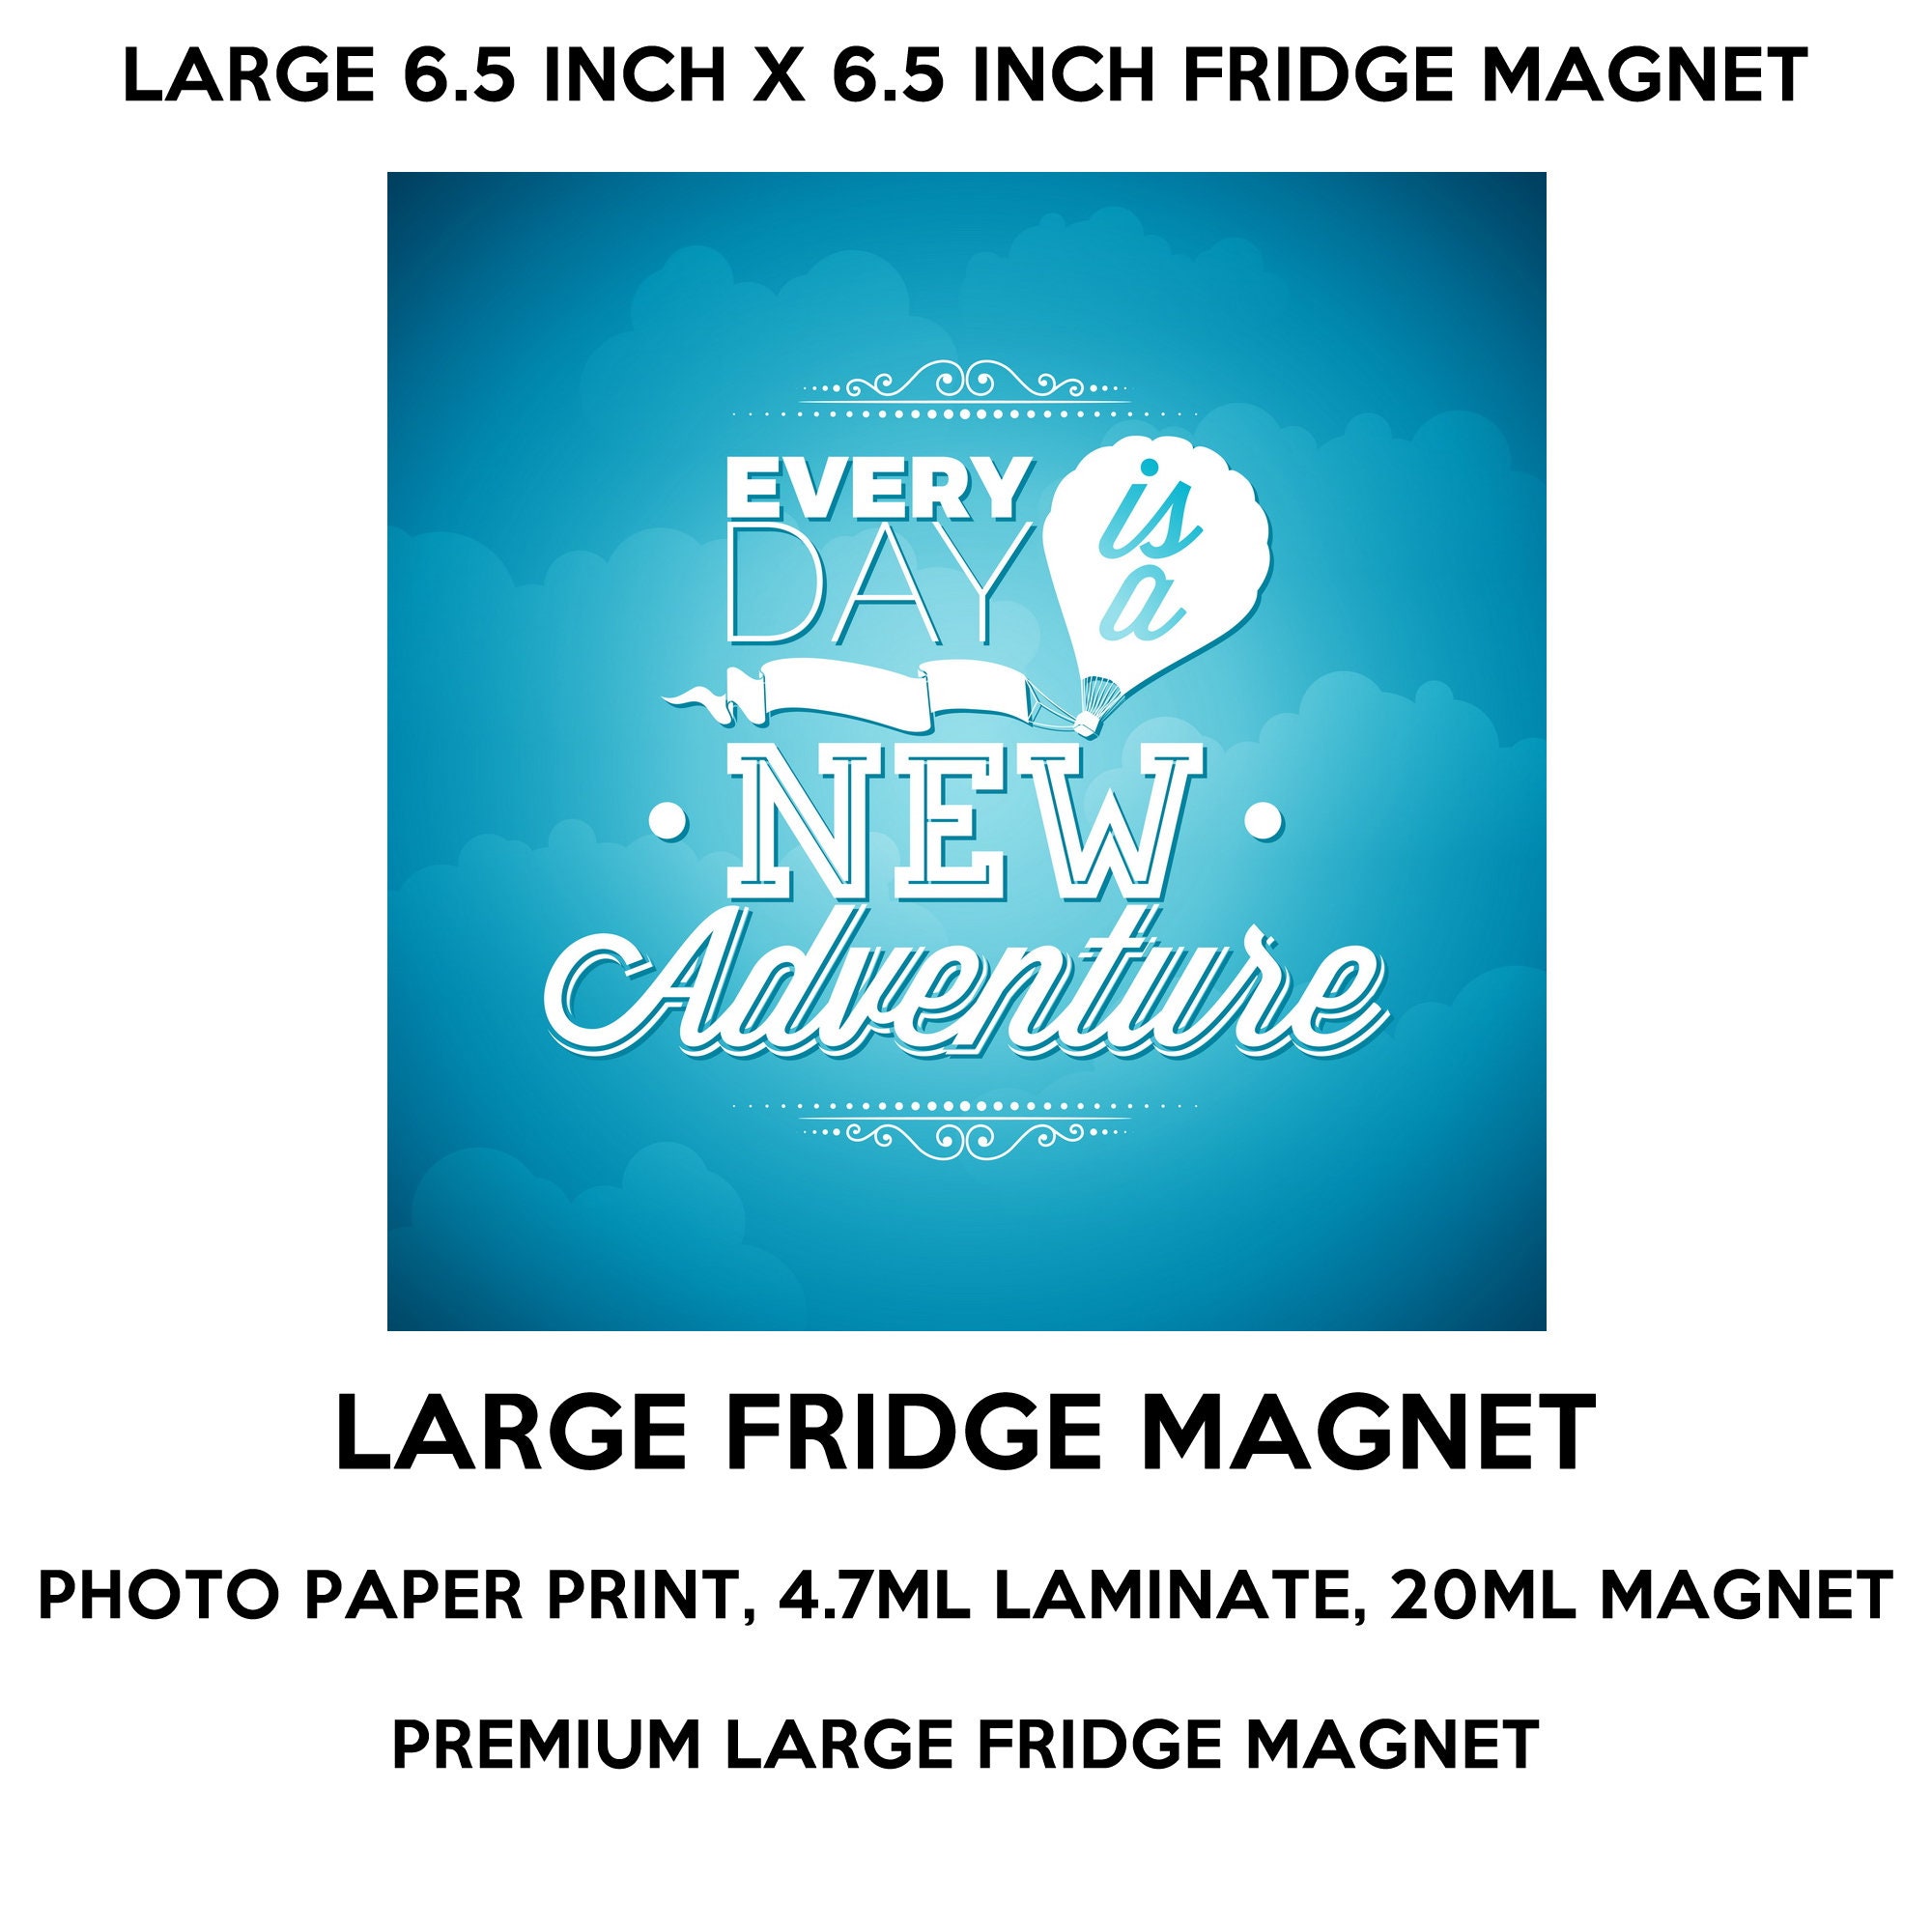 Every day is a new adventure fridge magnet, large 6 1/2 x 6 1/2 inch premium fridge magnet that stands out.